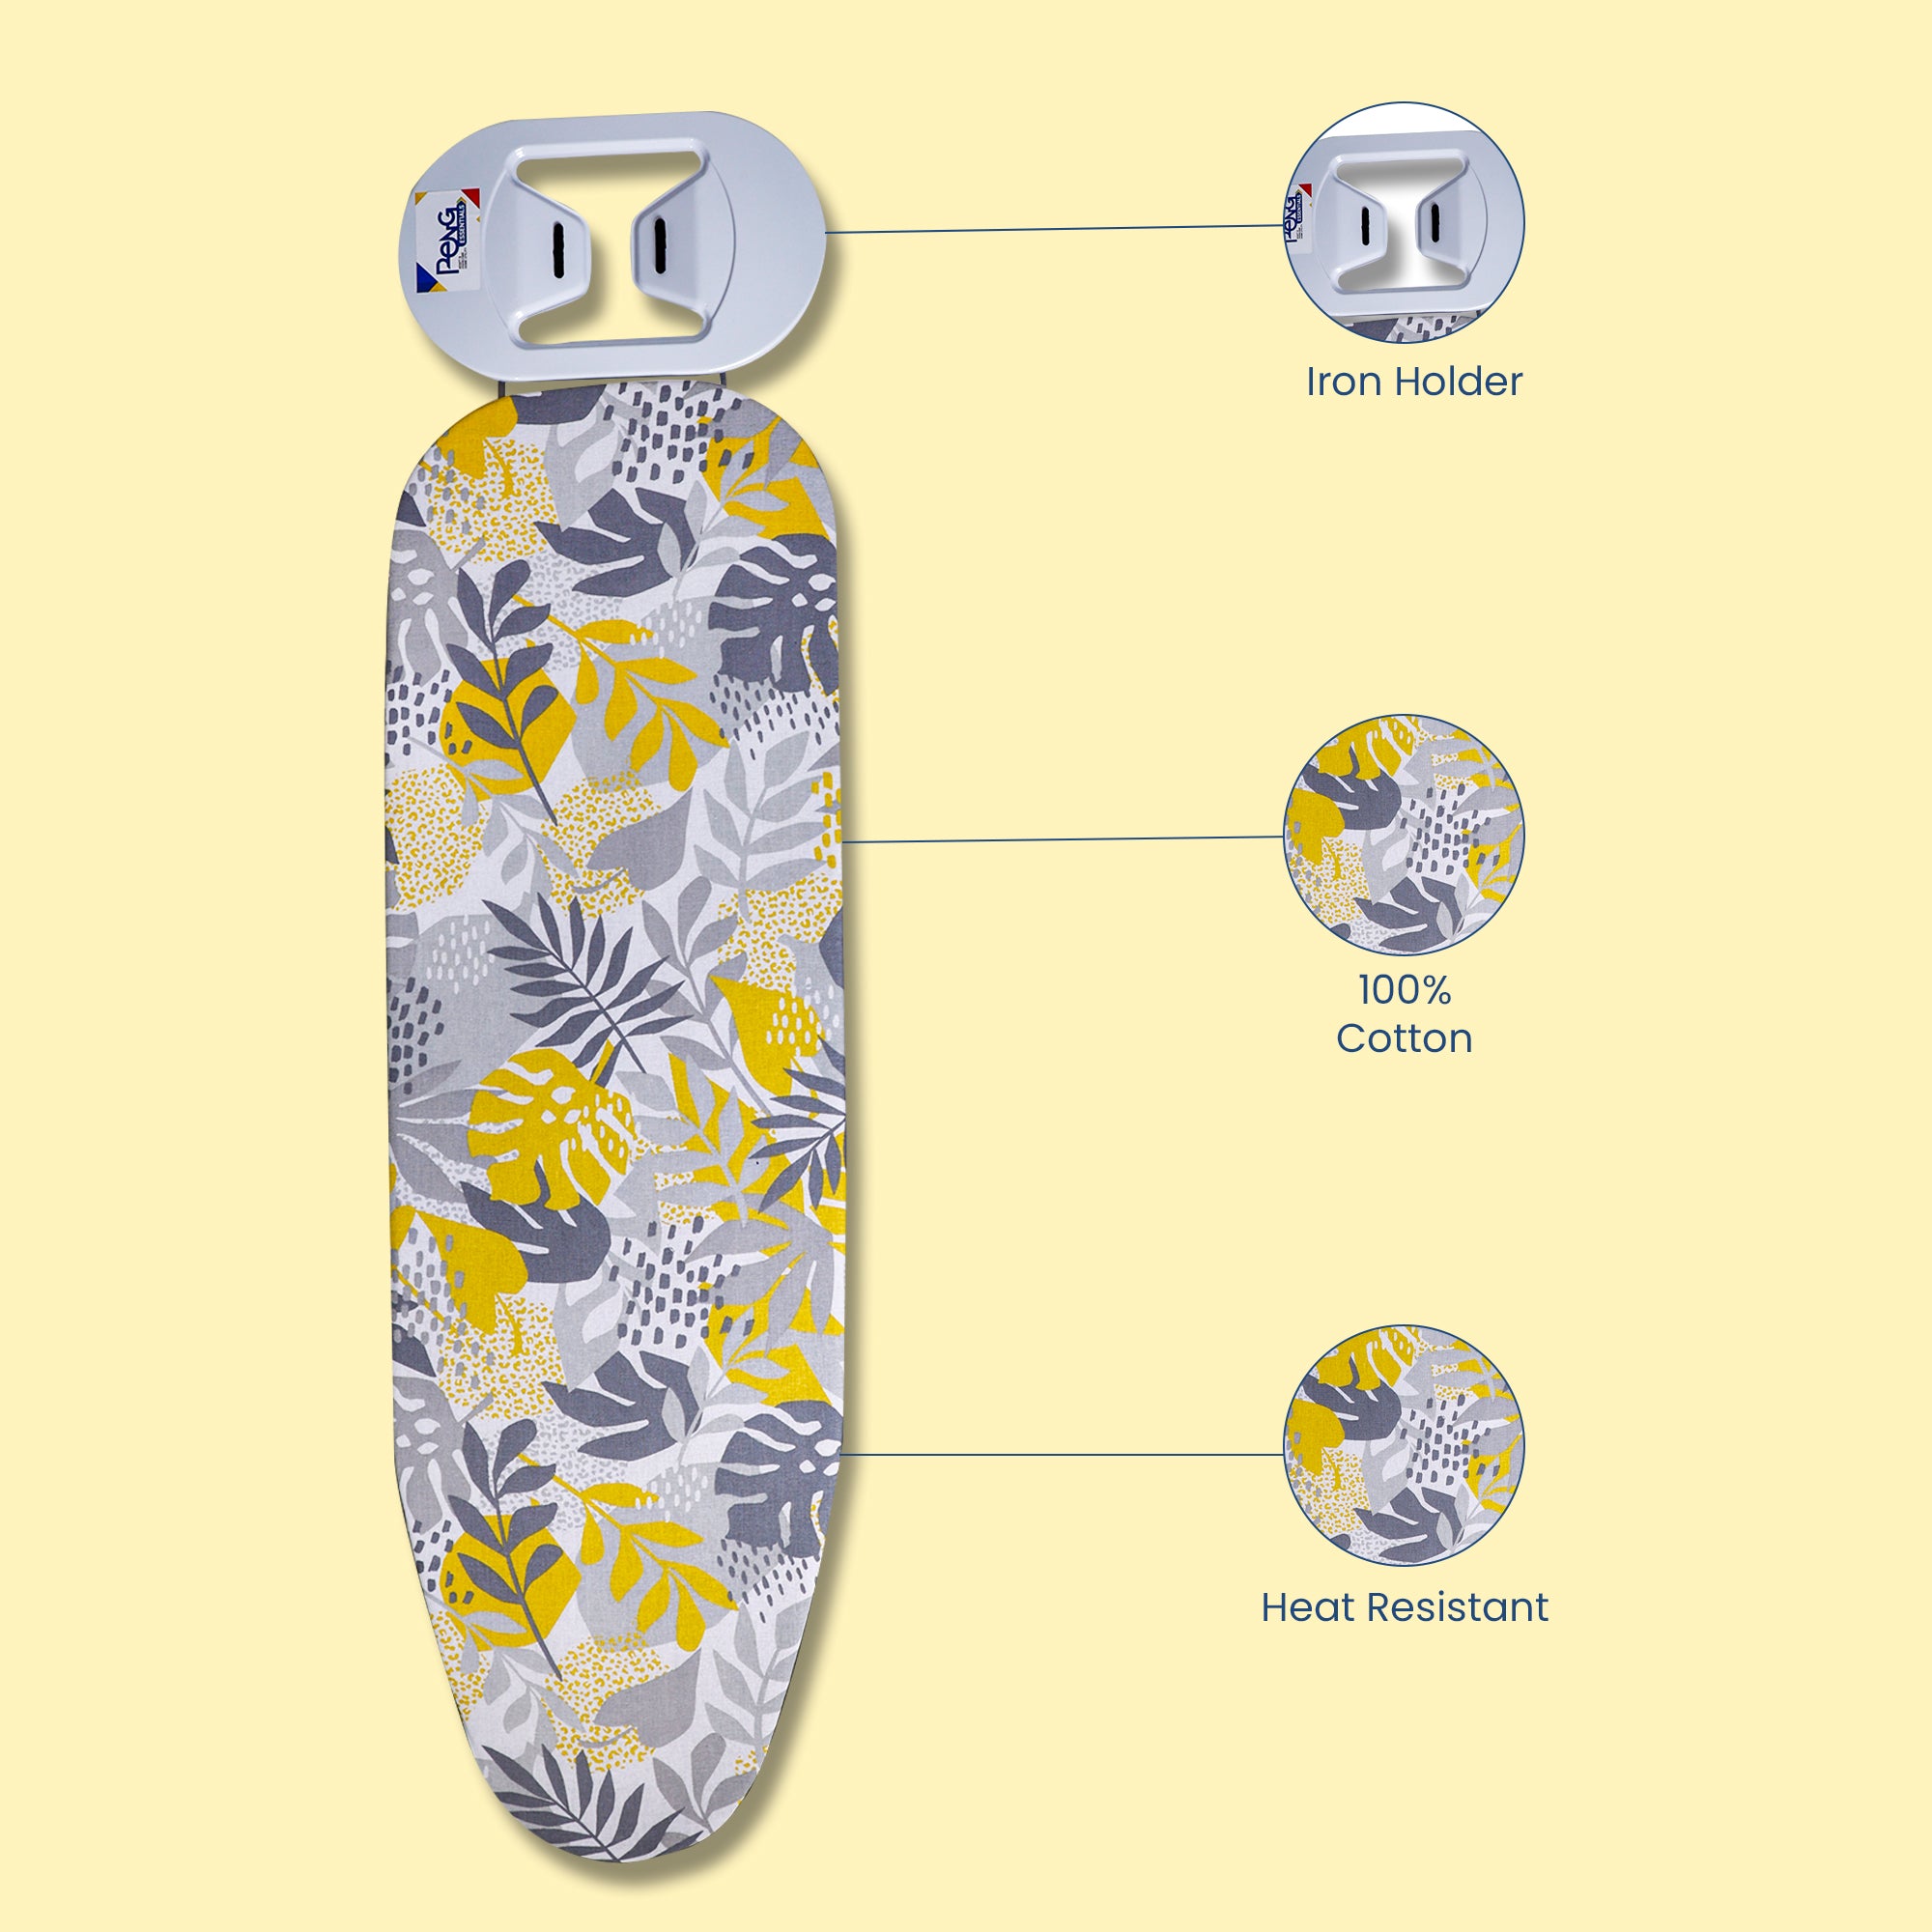 Seville Ironing Board | H-Leg Mild Steel Ironing Board with Silicone Iron Rest I Floral